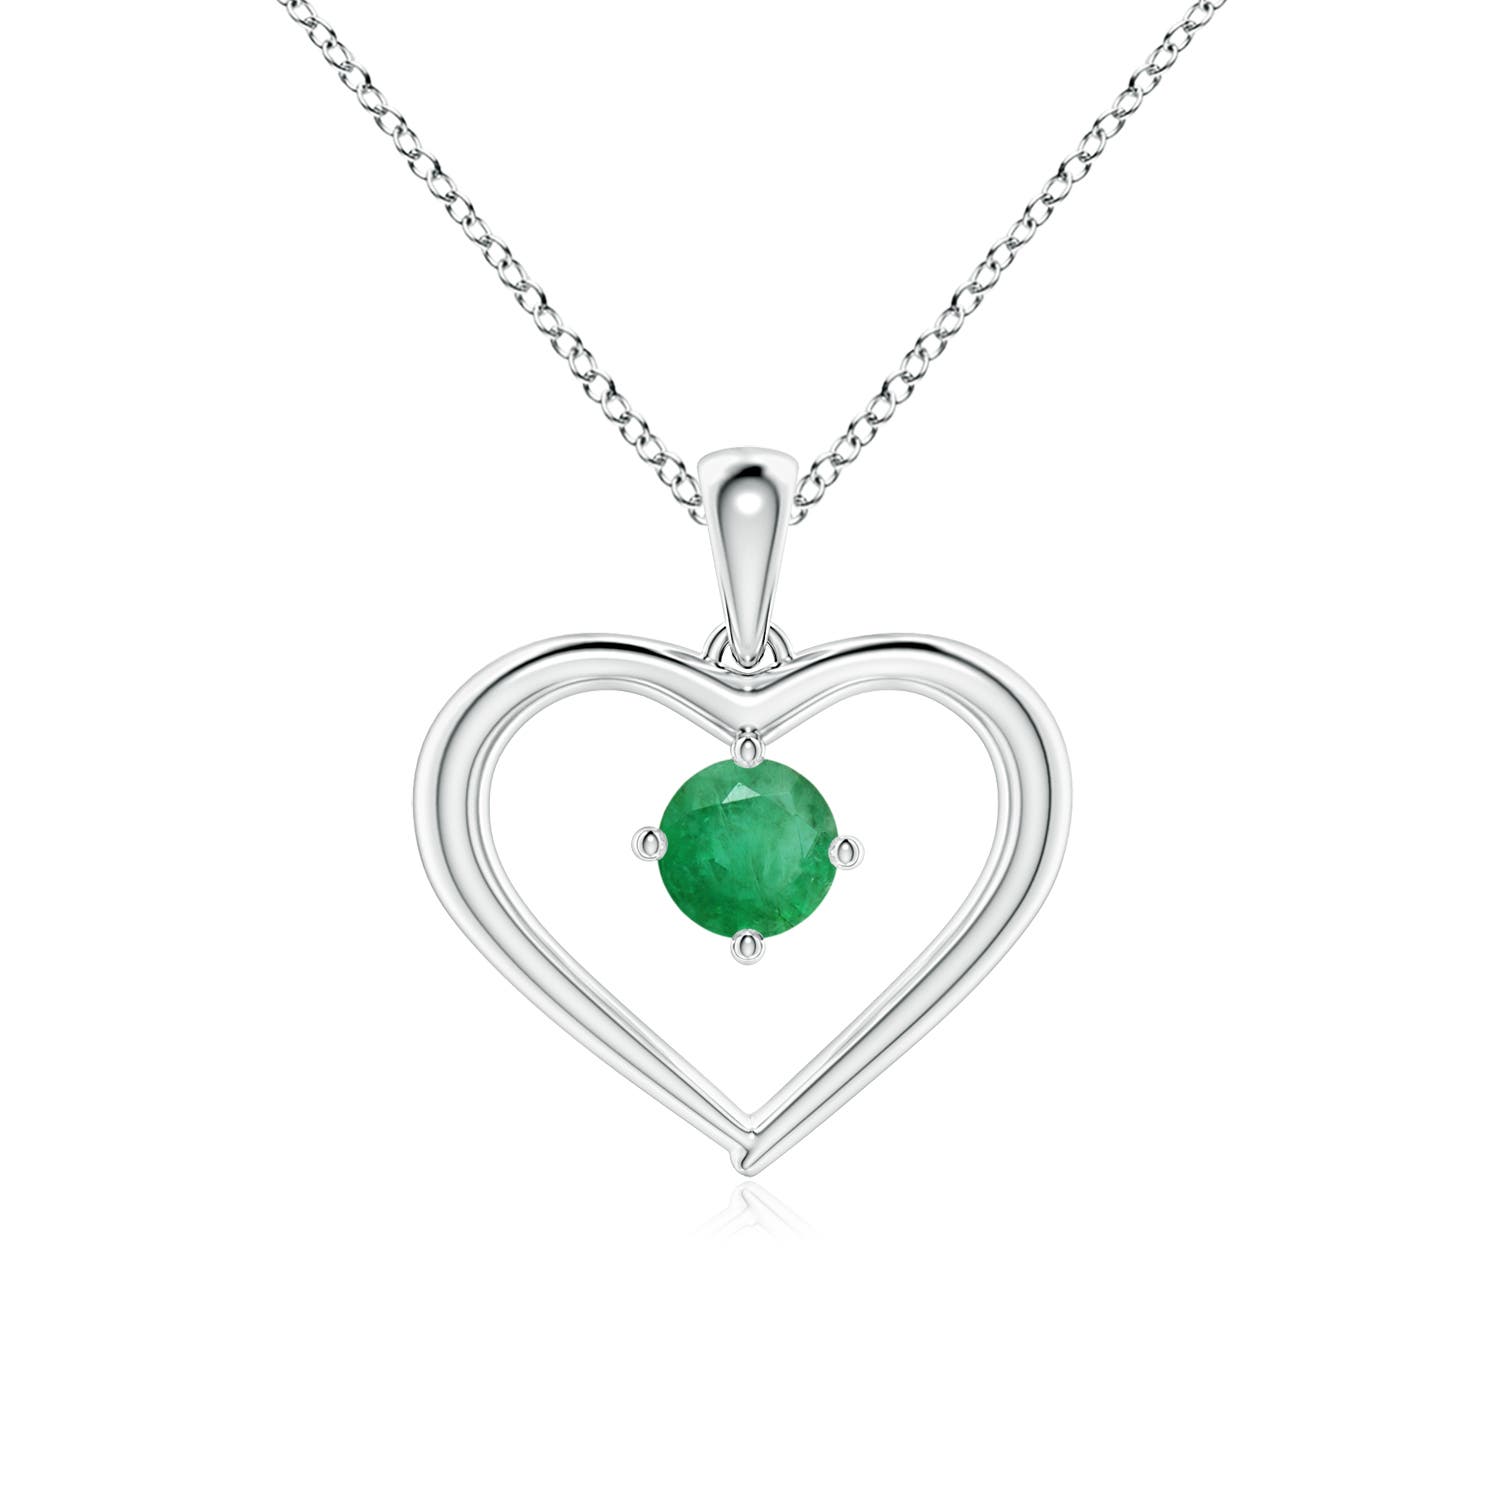 A - Emerald / 0.24 CT / 14 KT White Gold